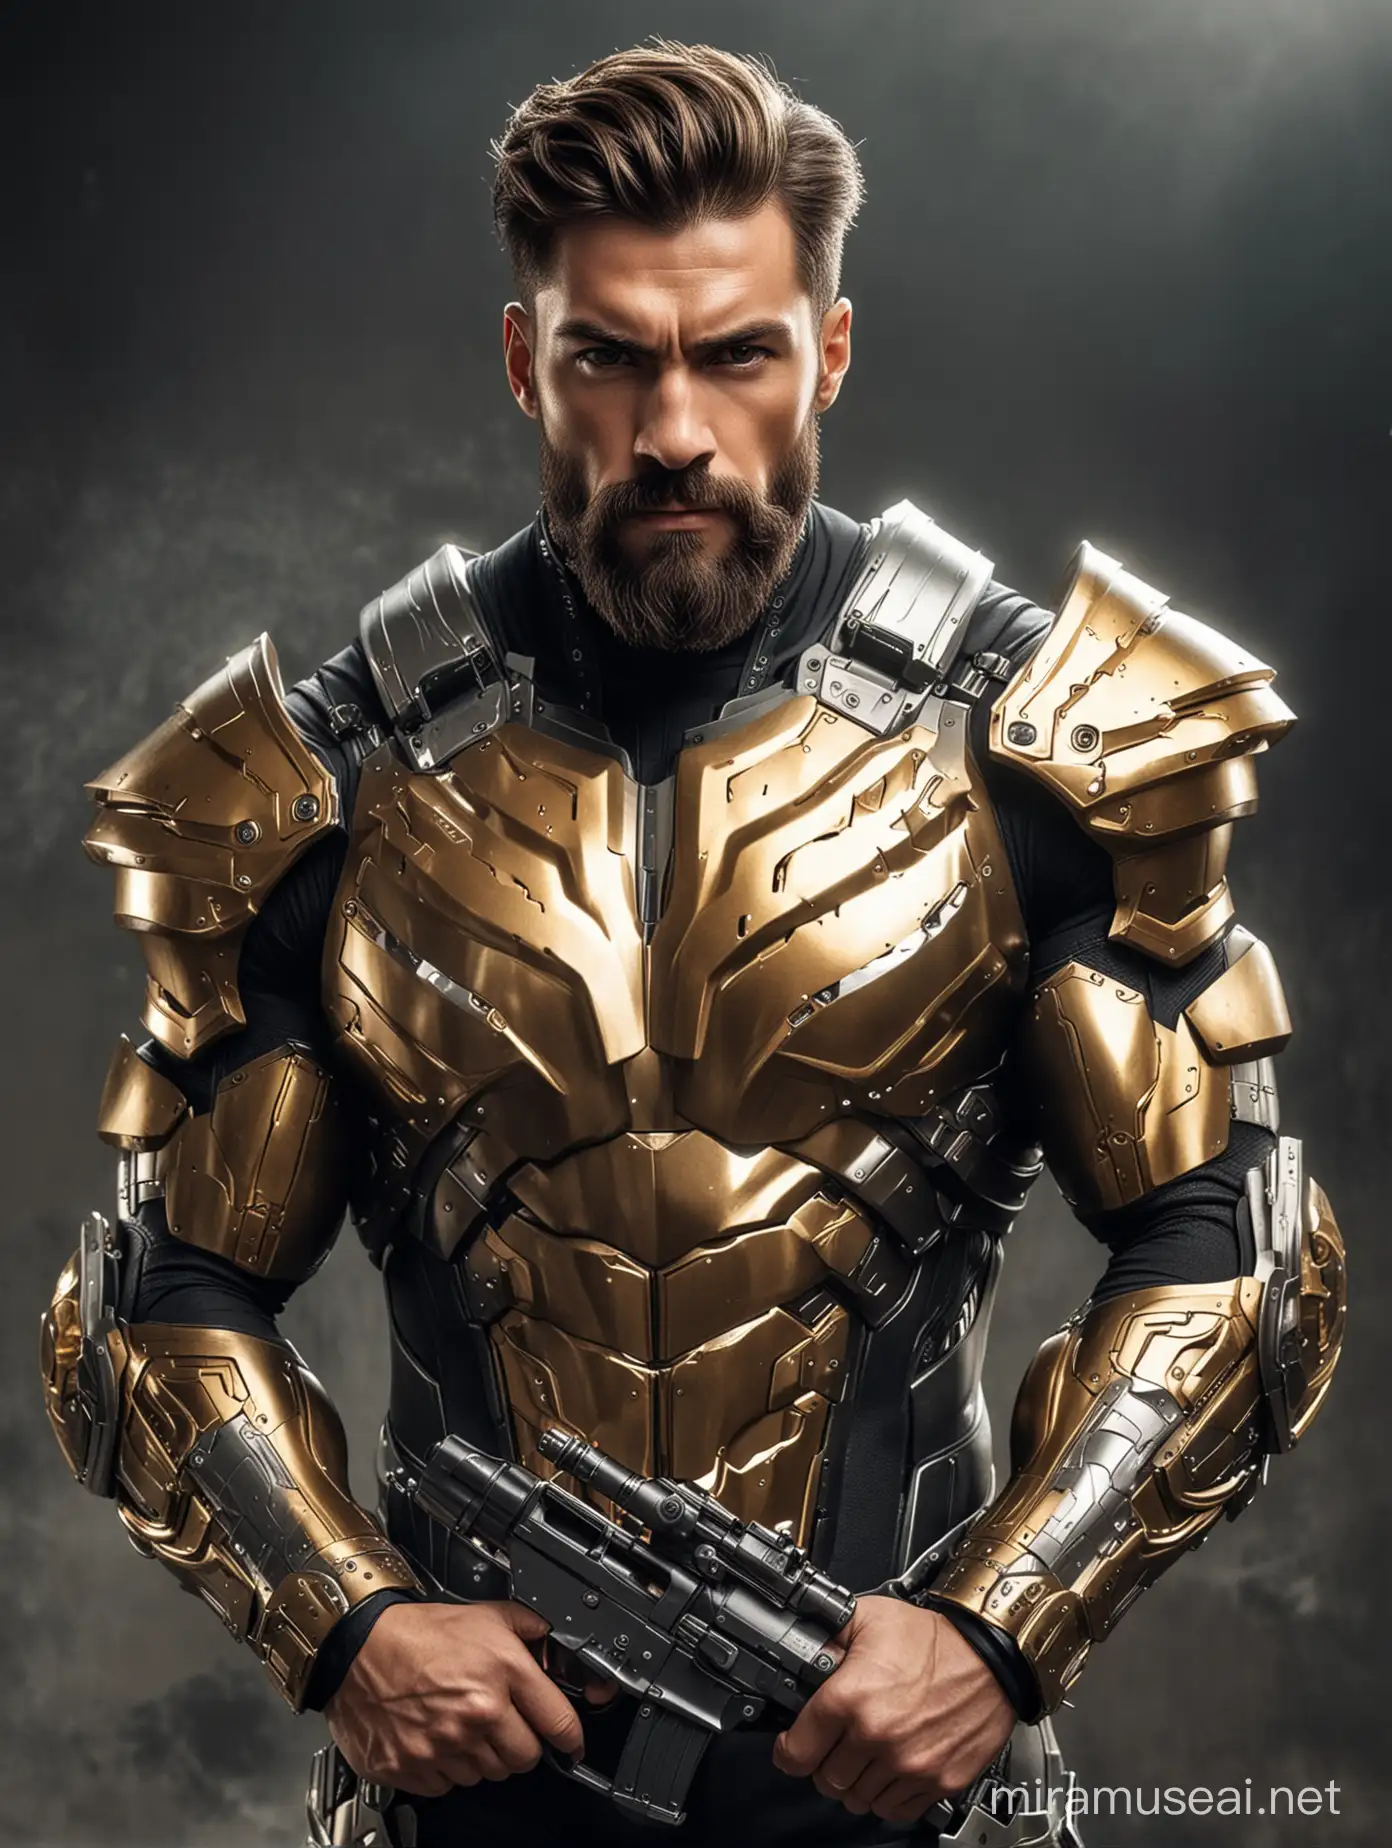 Tall and handsome bodybuilder men with beautiful hairstyle and beard with attractive eyes and Big wide shoulder and chest in sci-fi High Tech golden, sliver and black armour suit shooting with firearms on warzone 